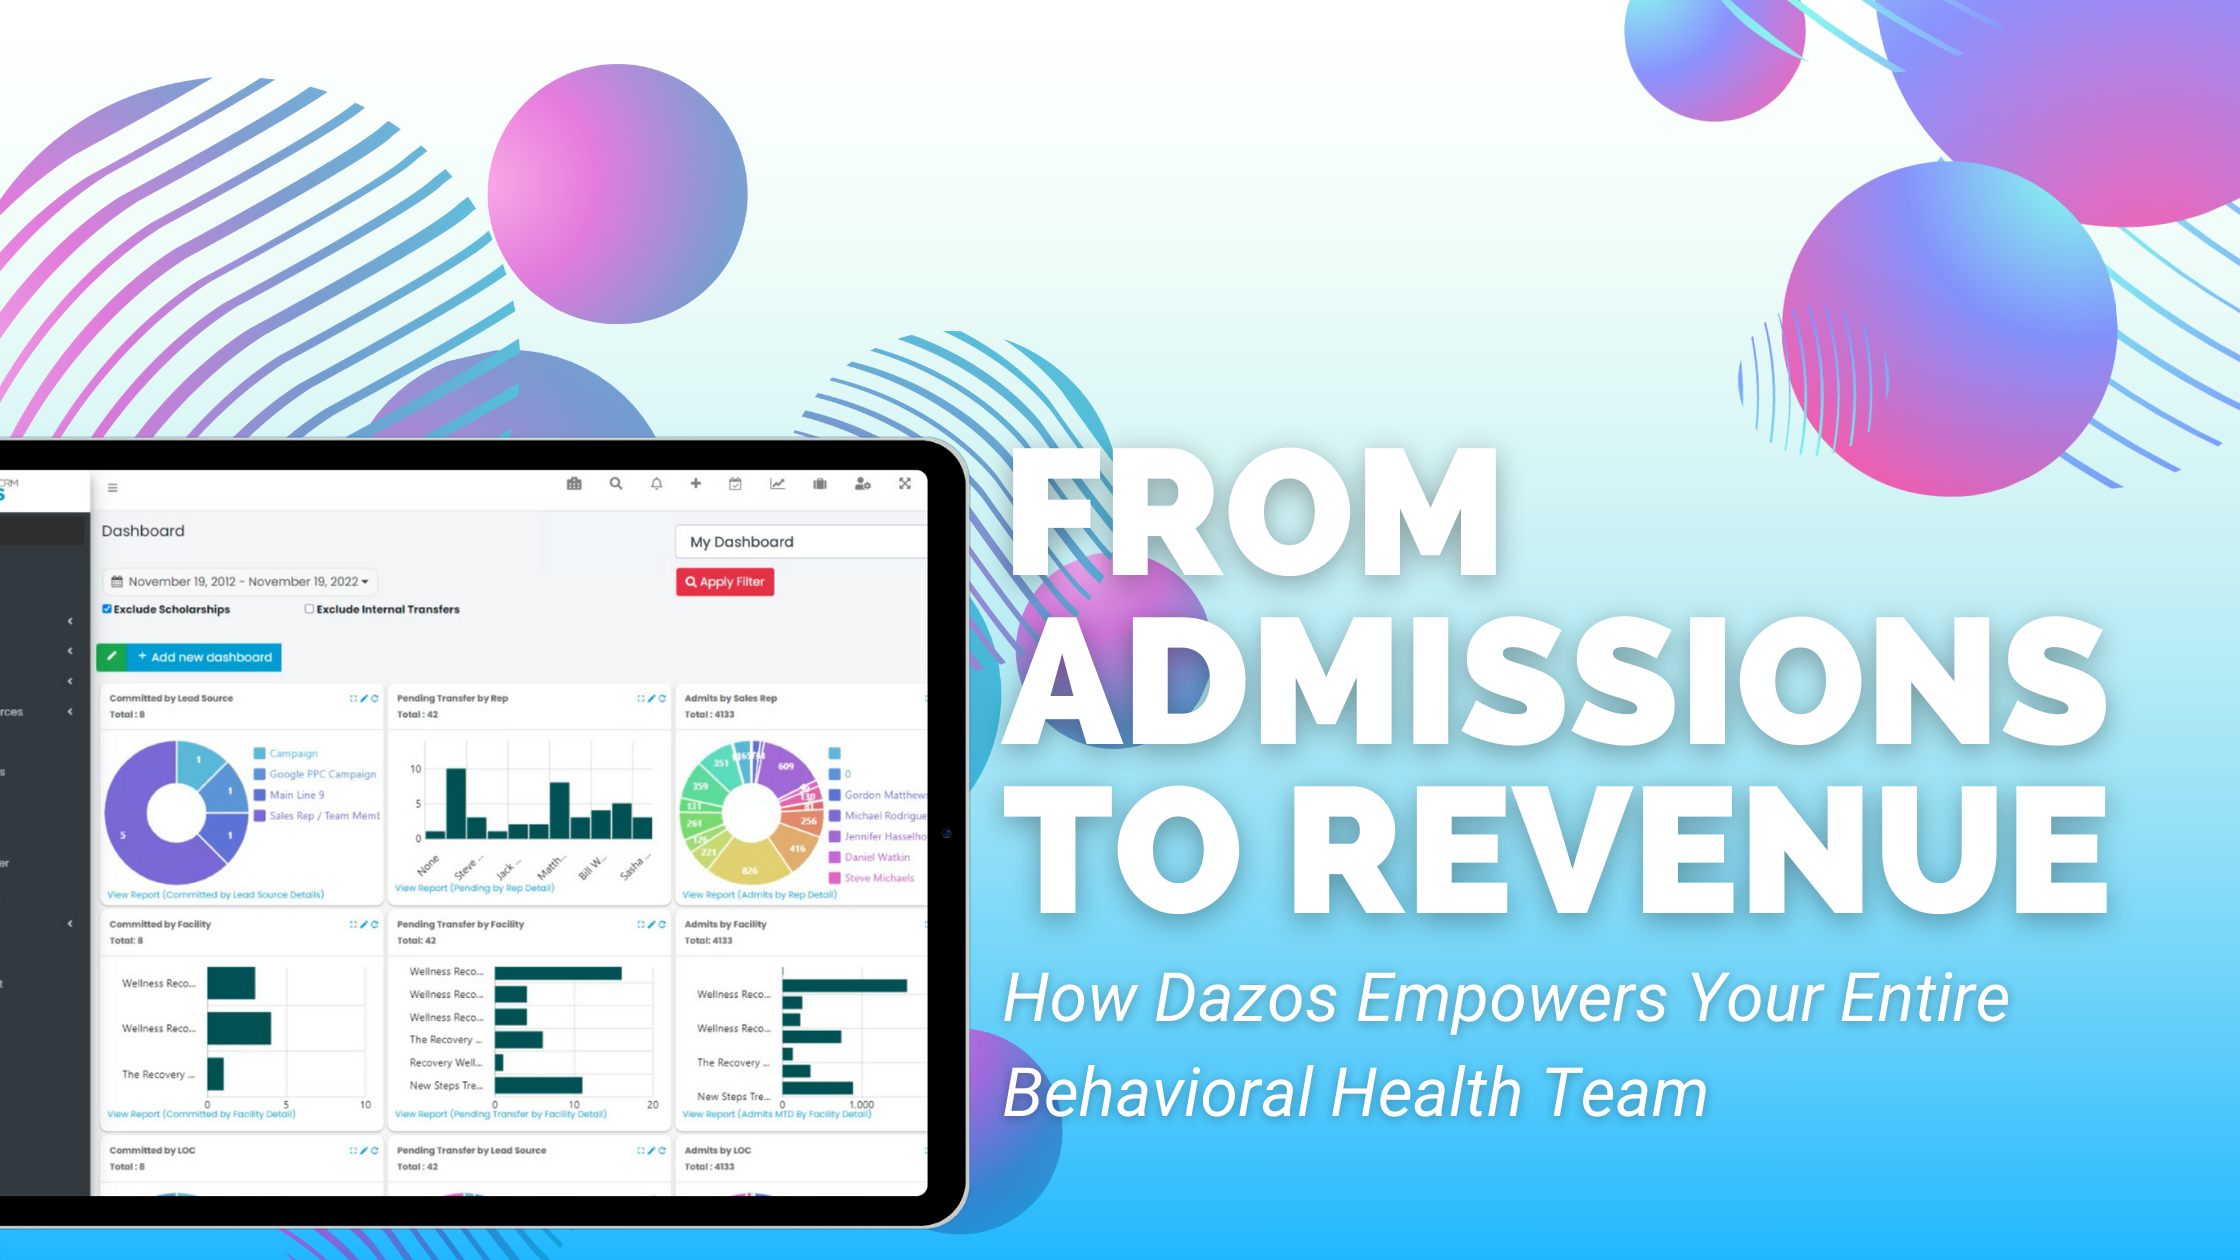 From admissions to revenue: how Dazos empowers your entire behavioral health team